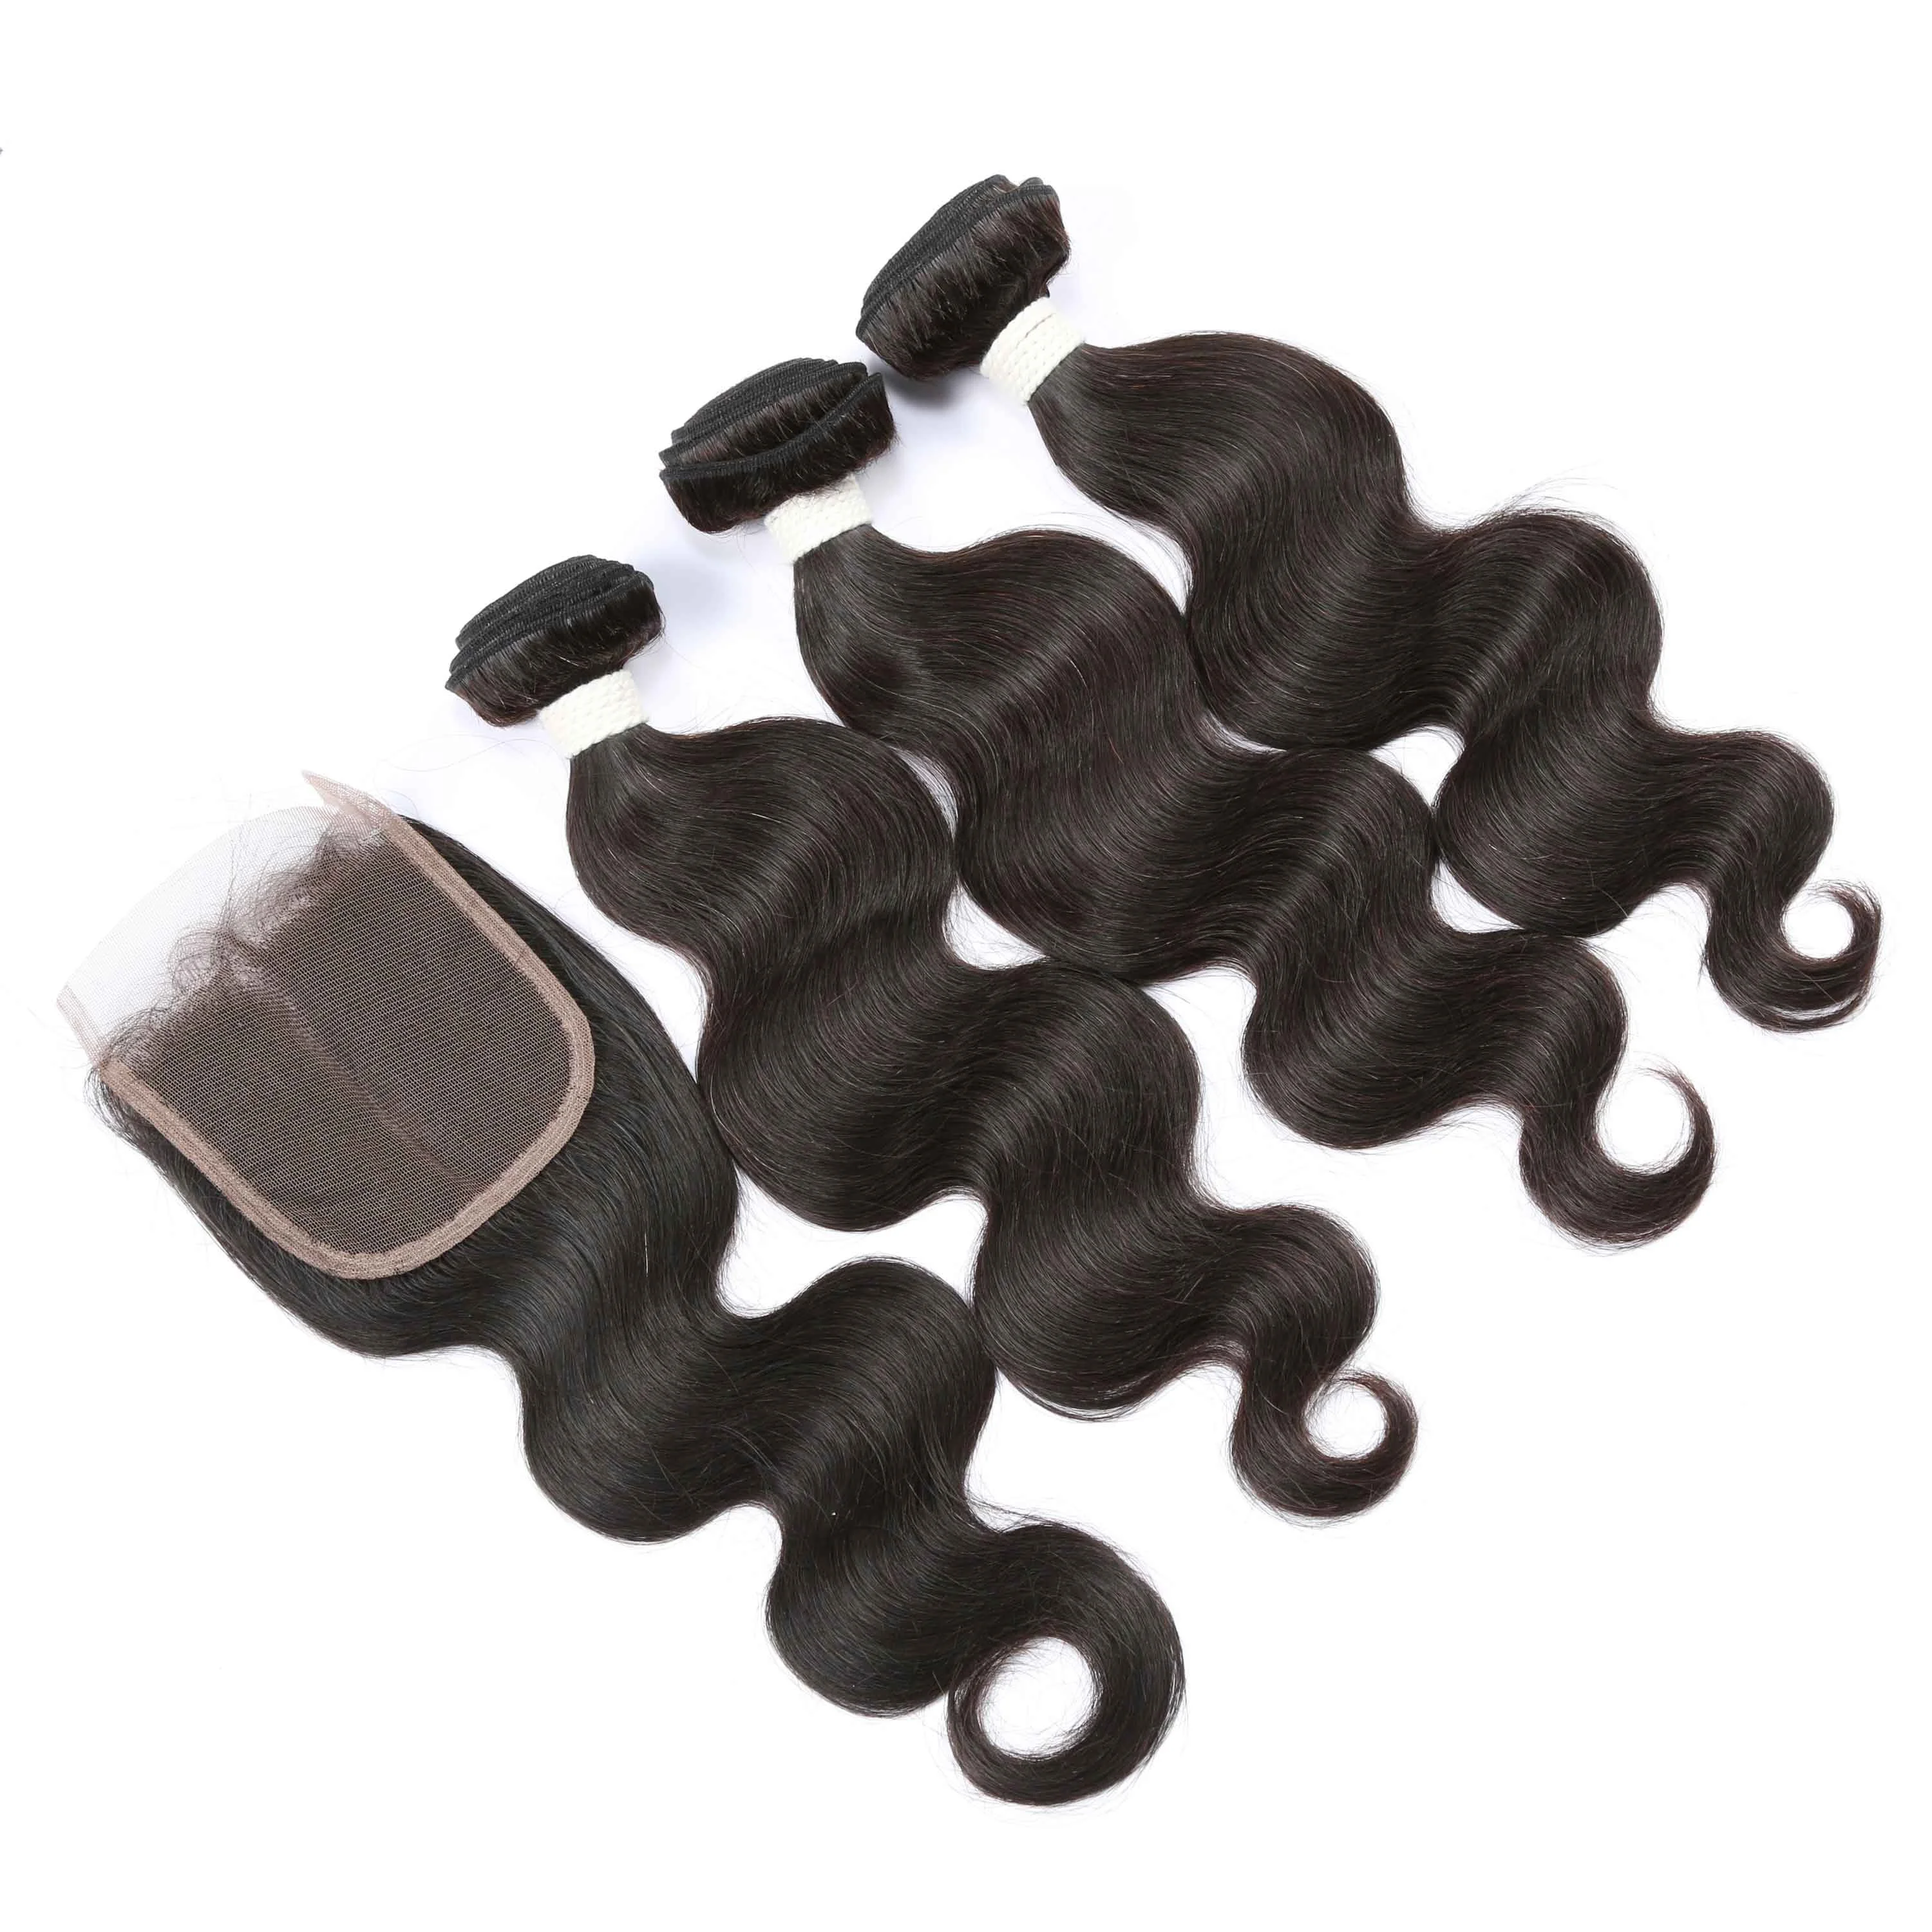 

Cheap human hair bundles virgin hair body wave Malaysian unprocessed weft vendor price 3 with lace closure, N/a